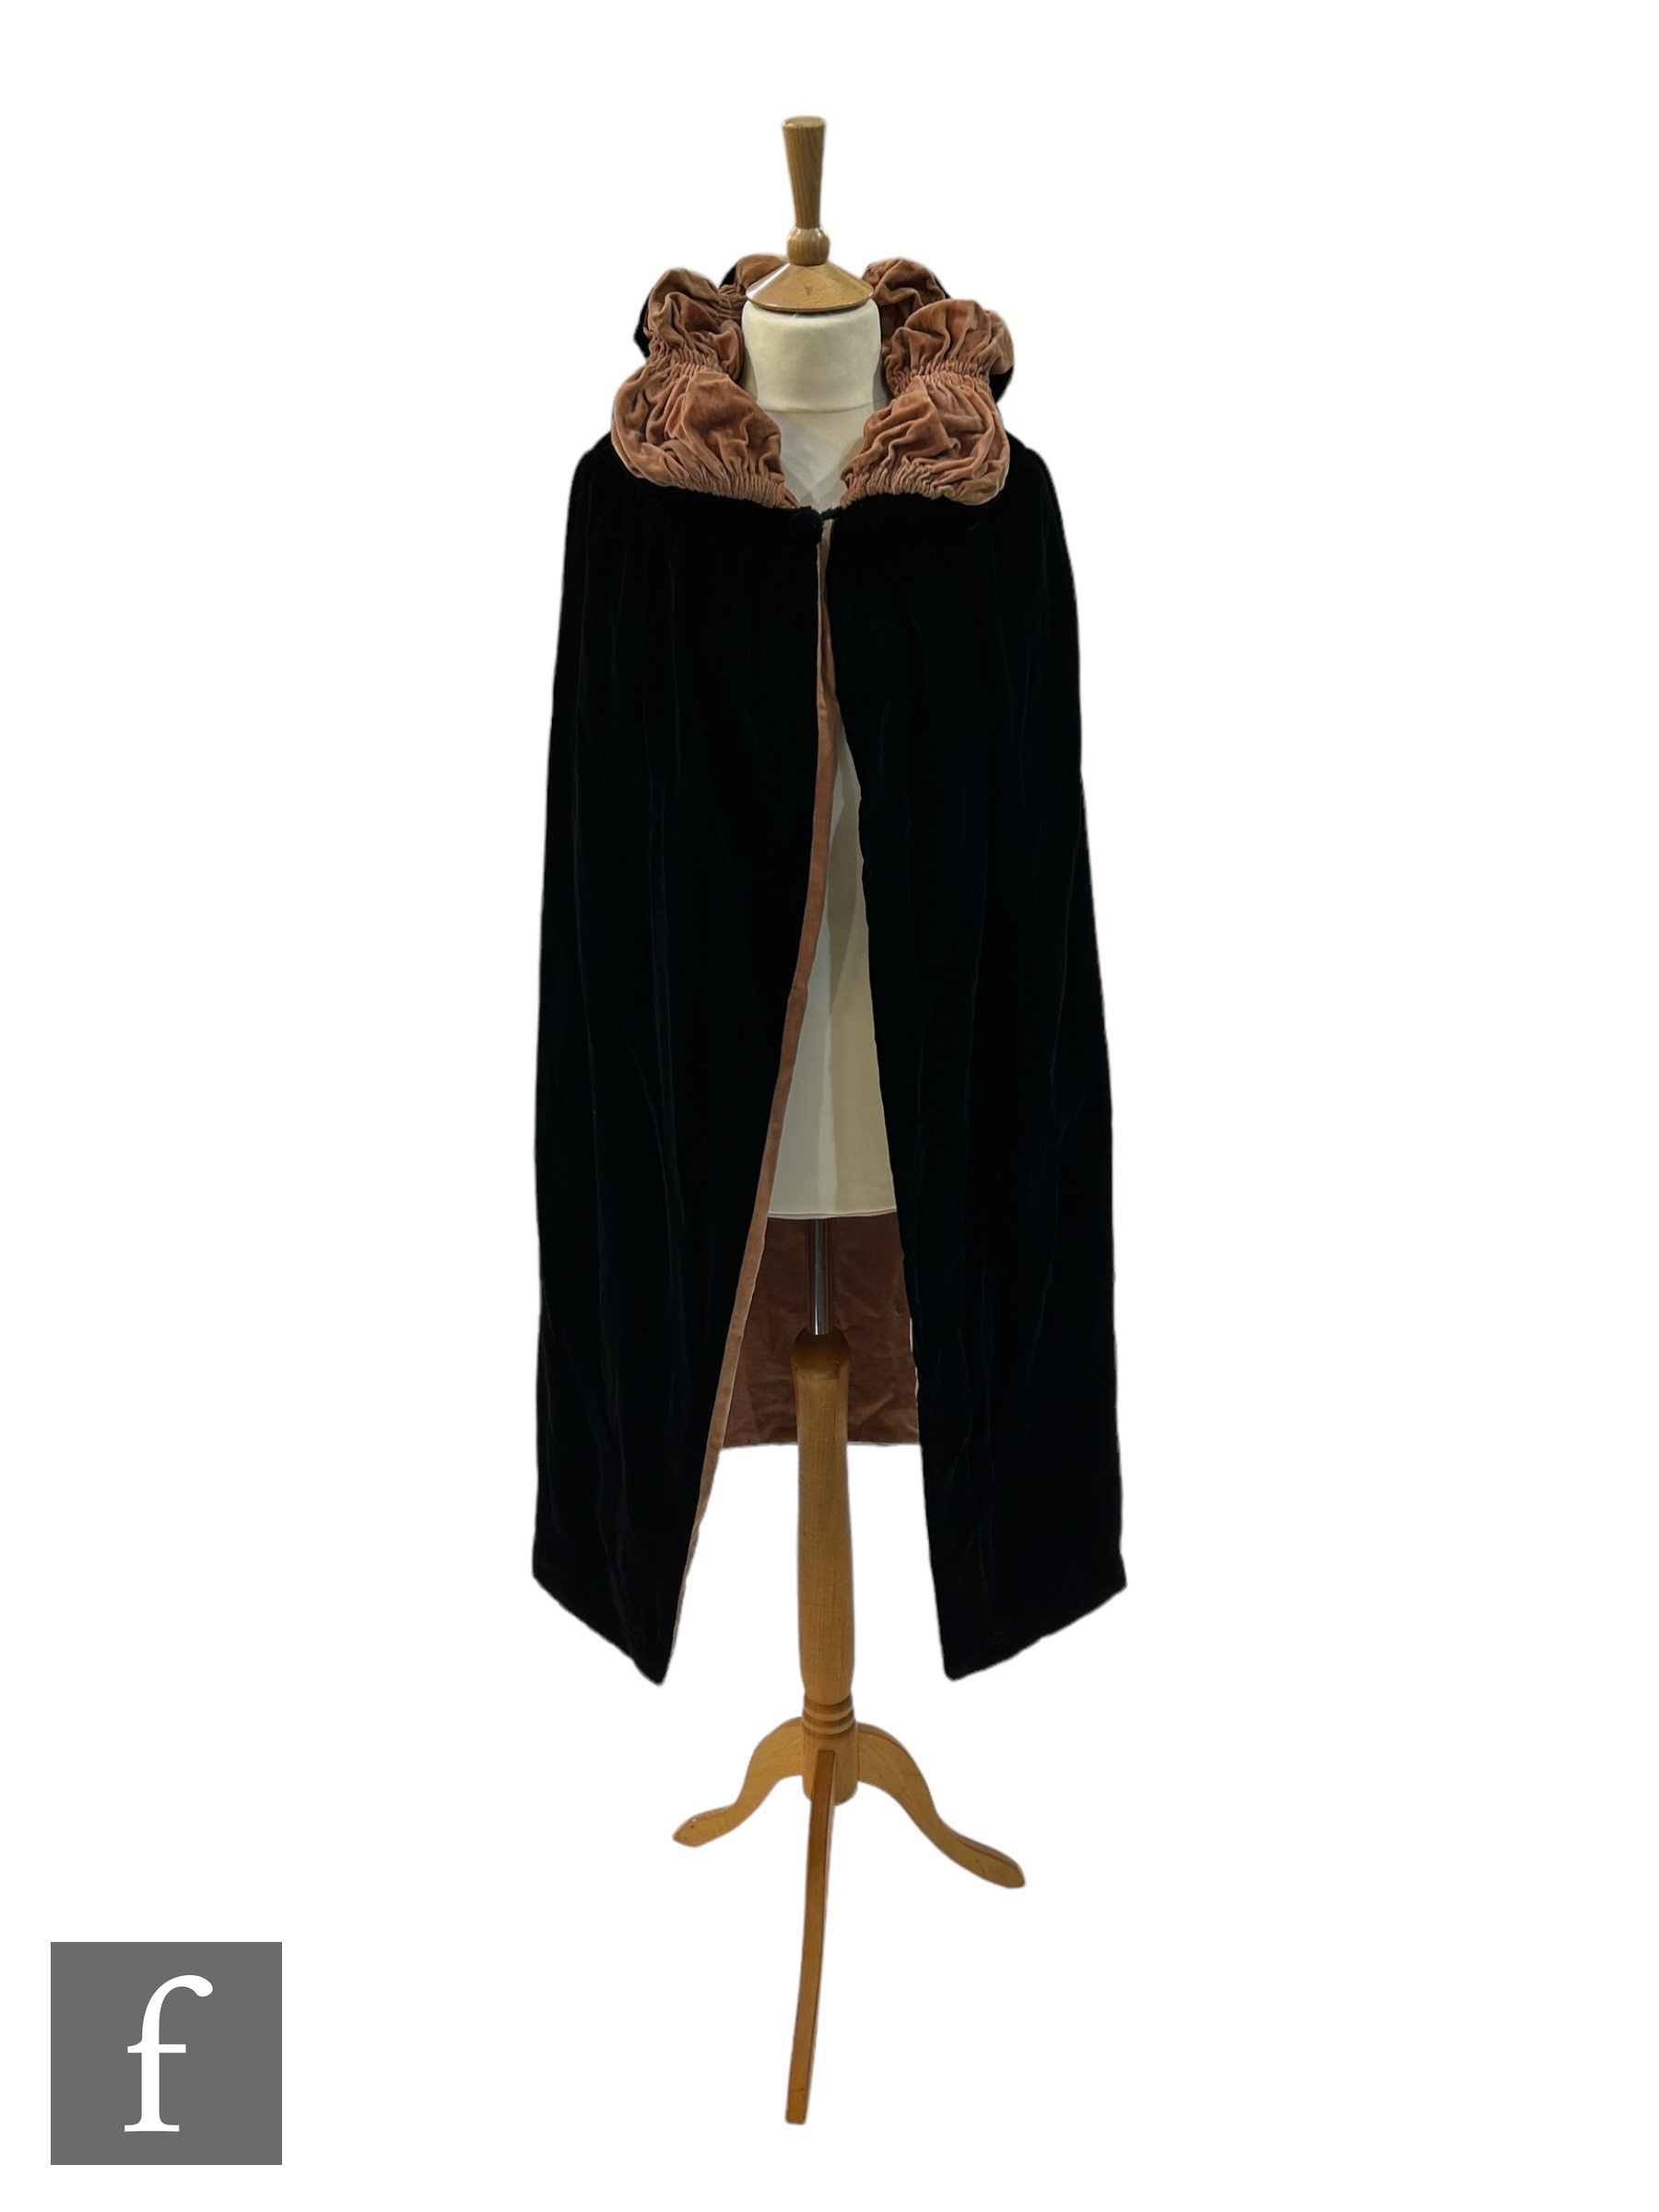 A 1920s reversible opera cape in black velvet with salmon pink lining and ruched padded collar.